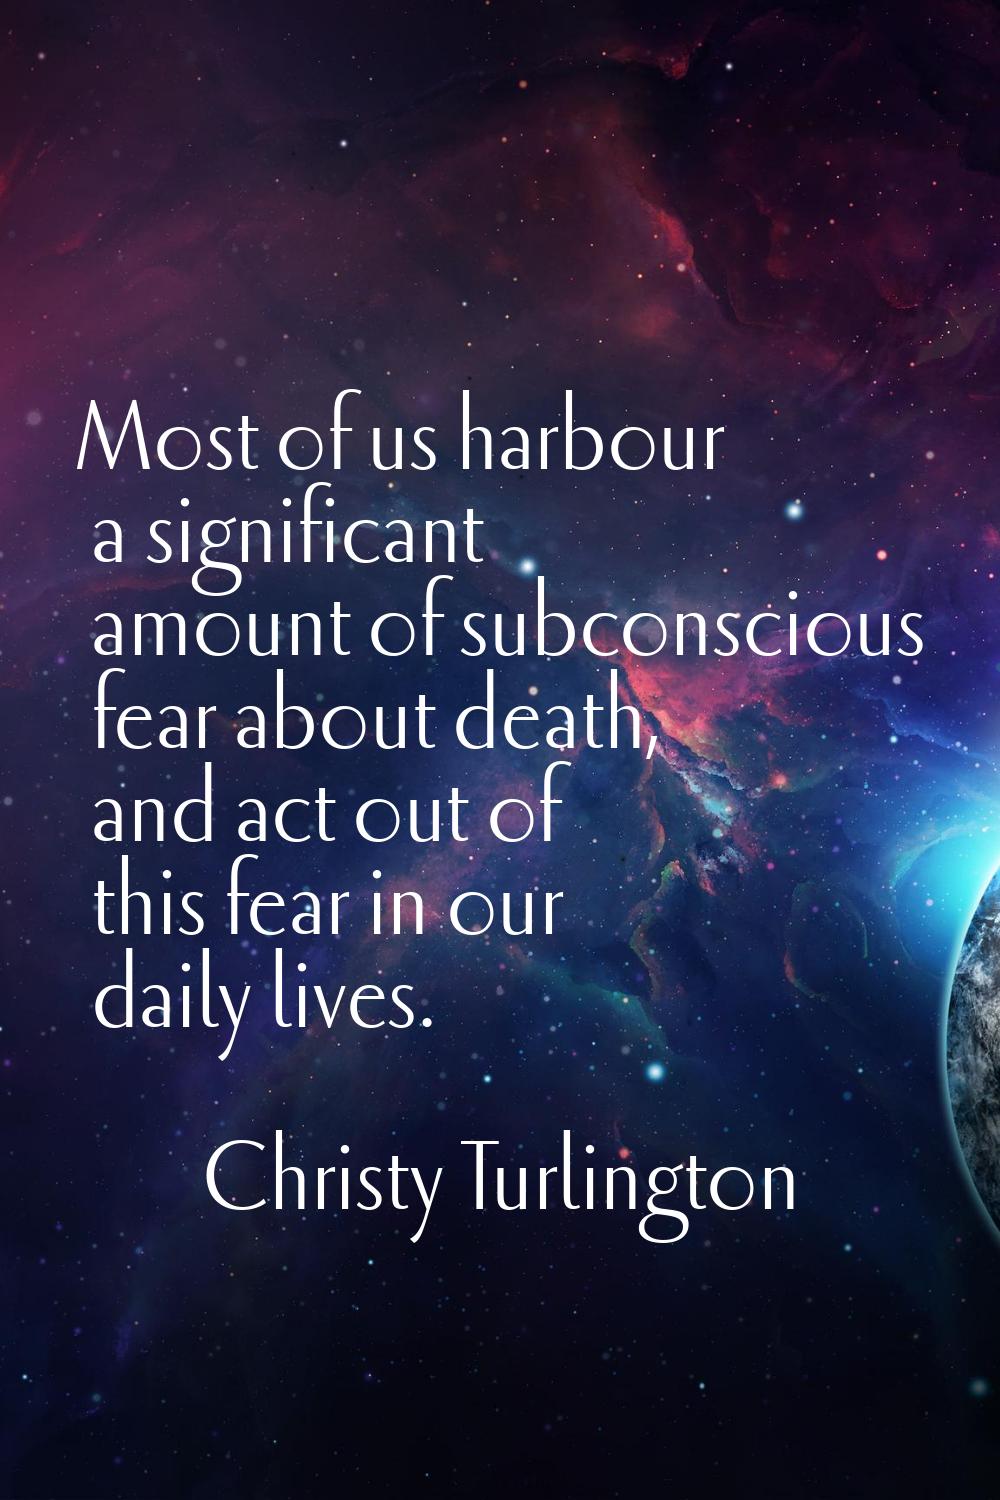 Most of us harbour a significant amount of subconscious fear about death, and act out of this fear 